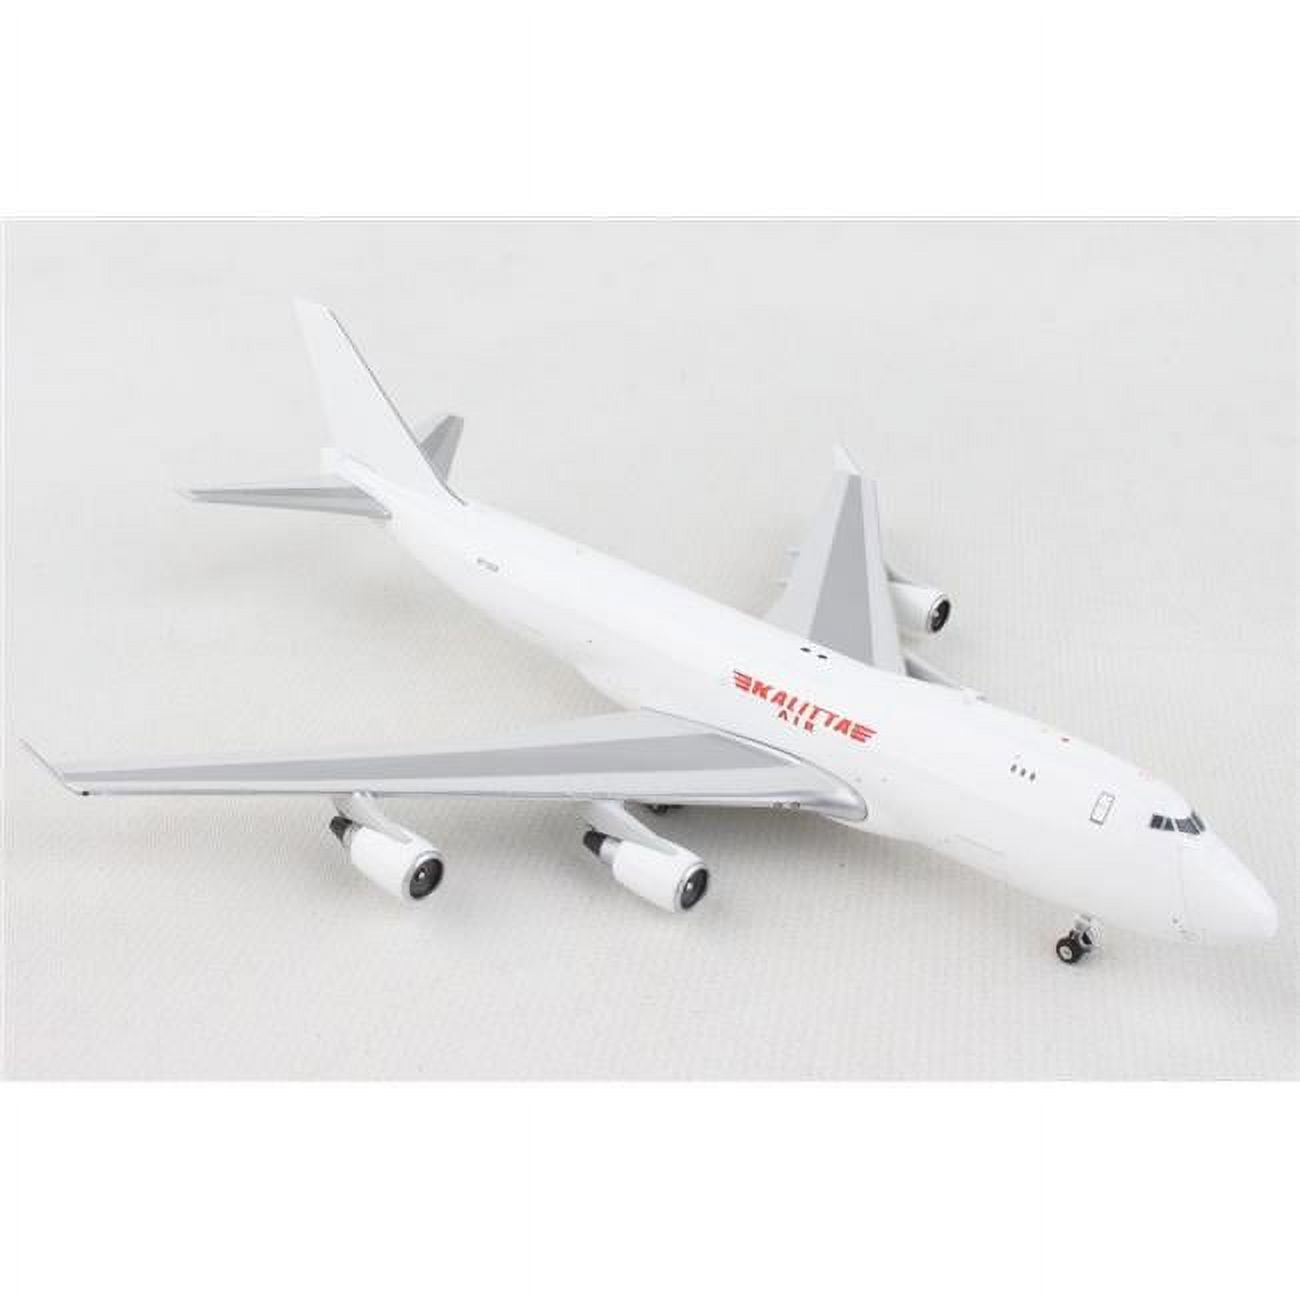 Picture of Phoenix Diecast PH2169 1-400 Scale No.N712Ck Reg Jal & Kalitta 747-400F Model Airplane